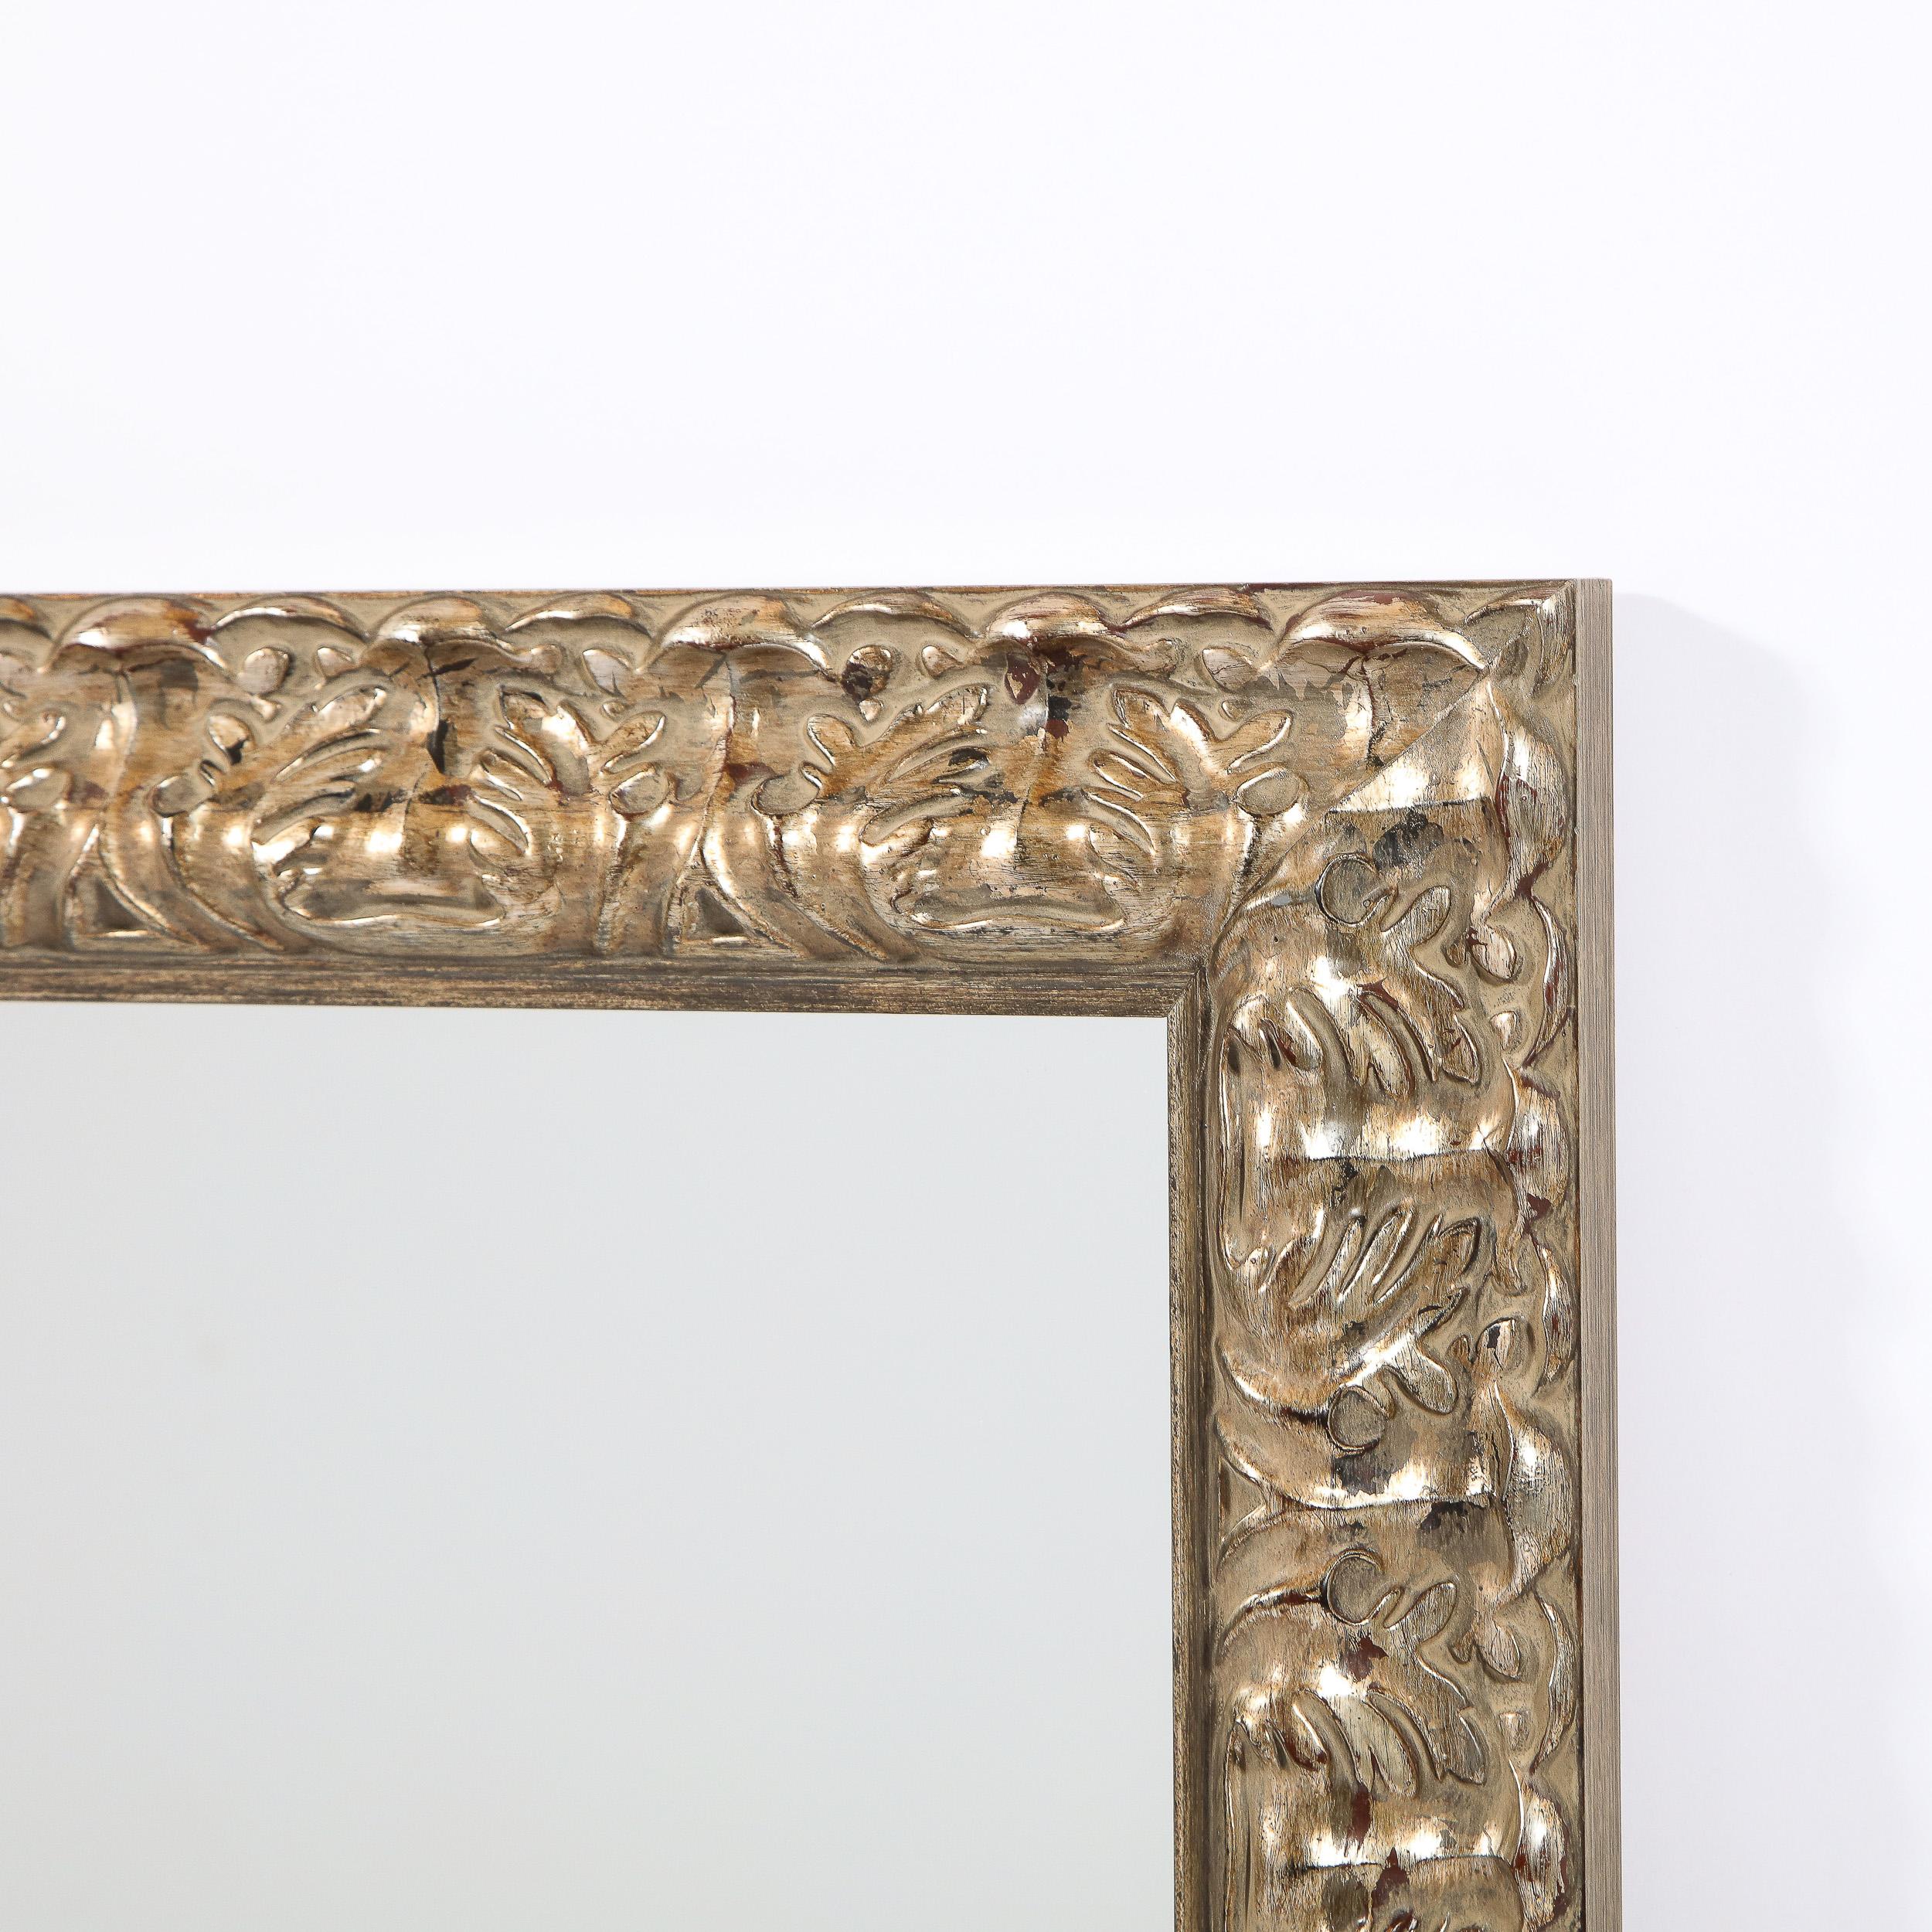 Modernist Stylized Carved Foliate Giltwood Rectangular Mirror For Sale 4